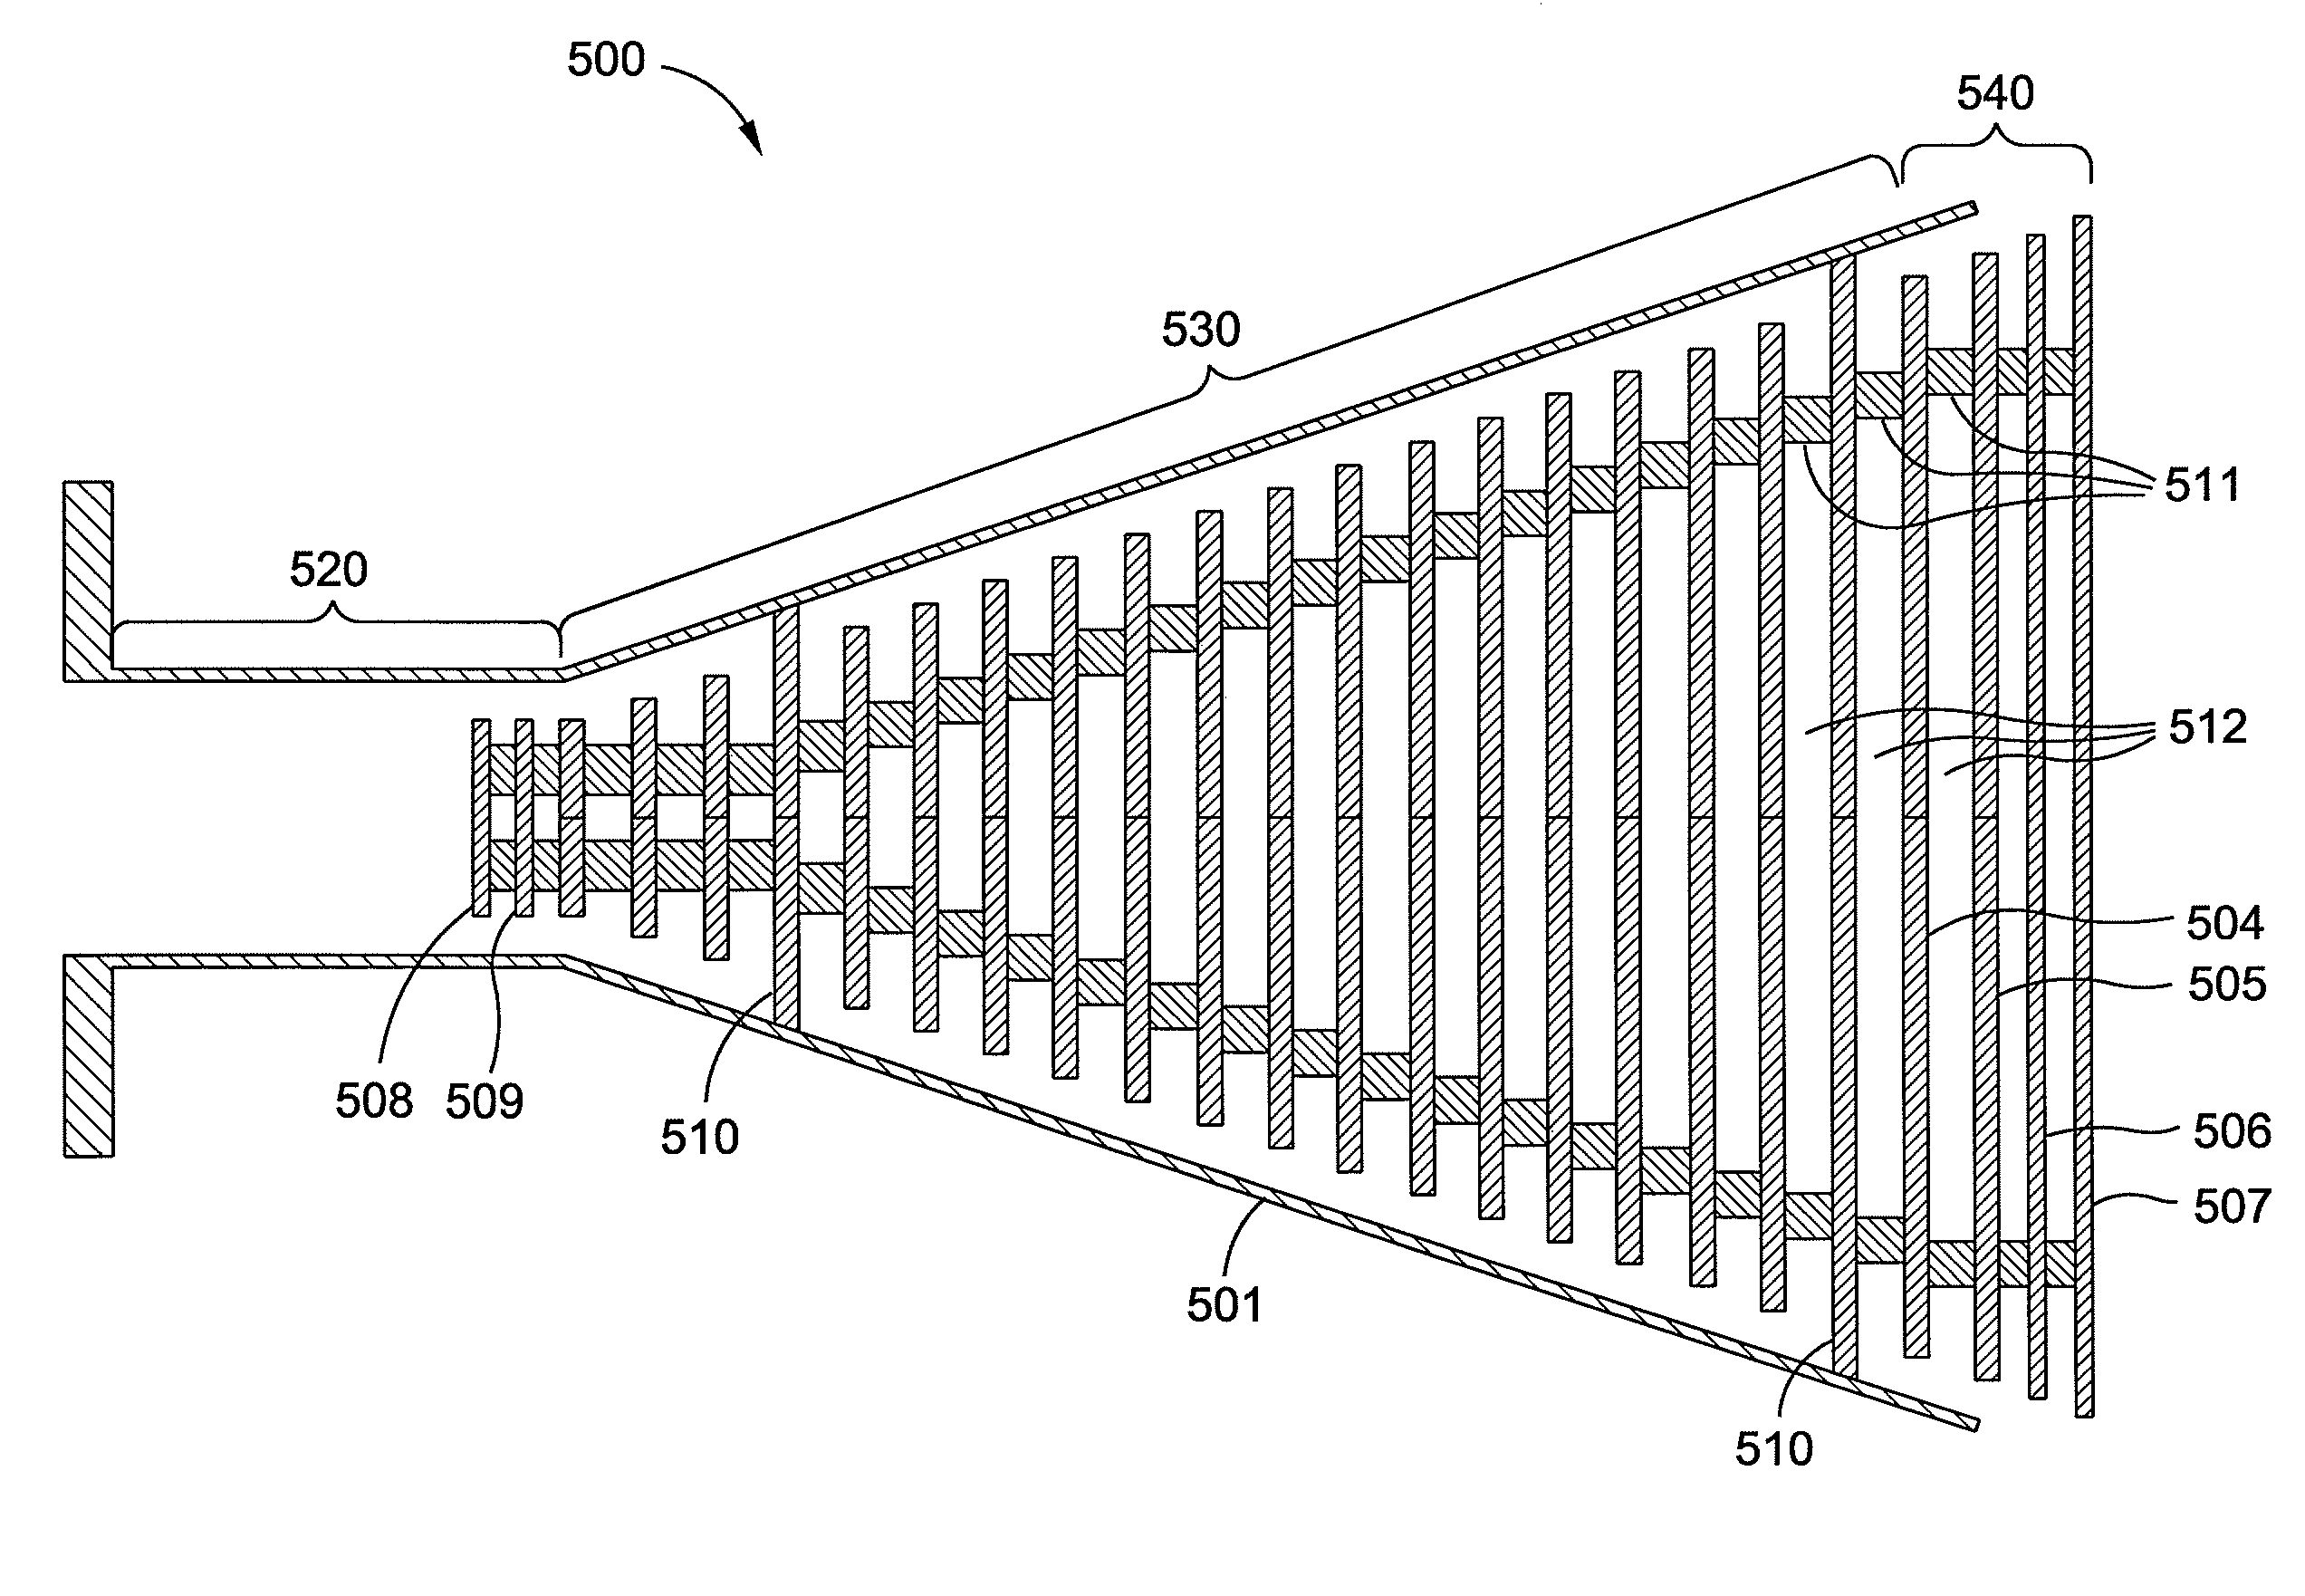 Artificial dielectric antenna elements